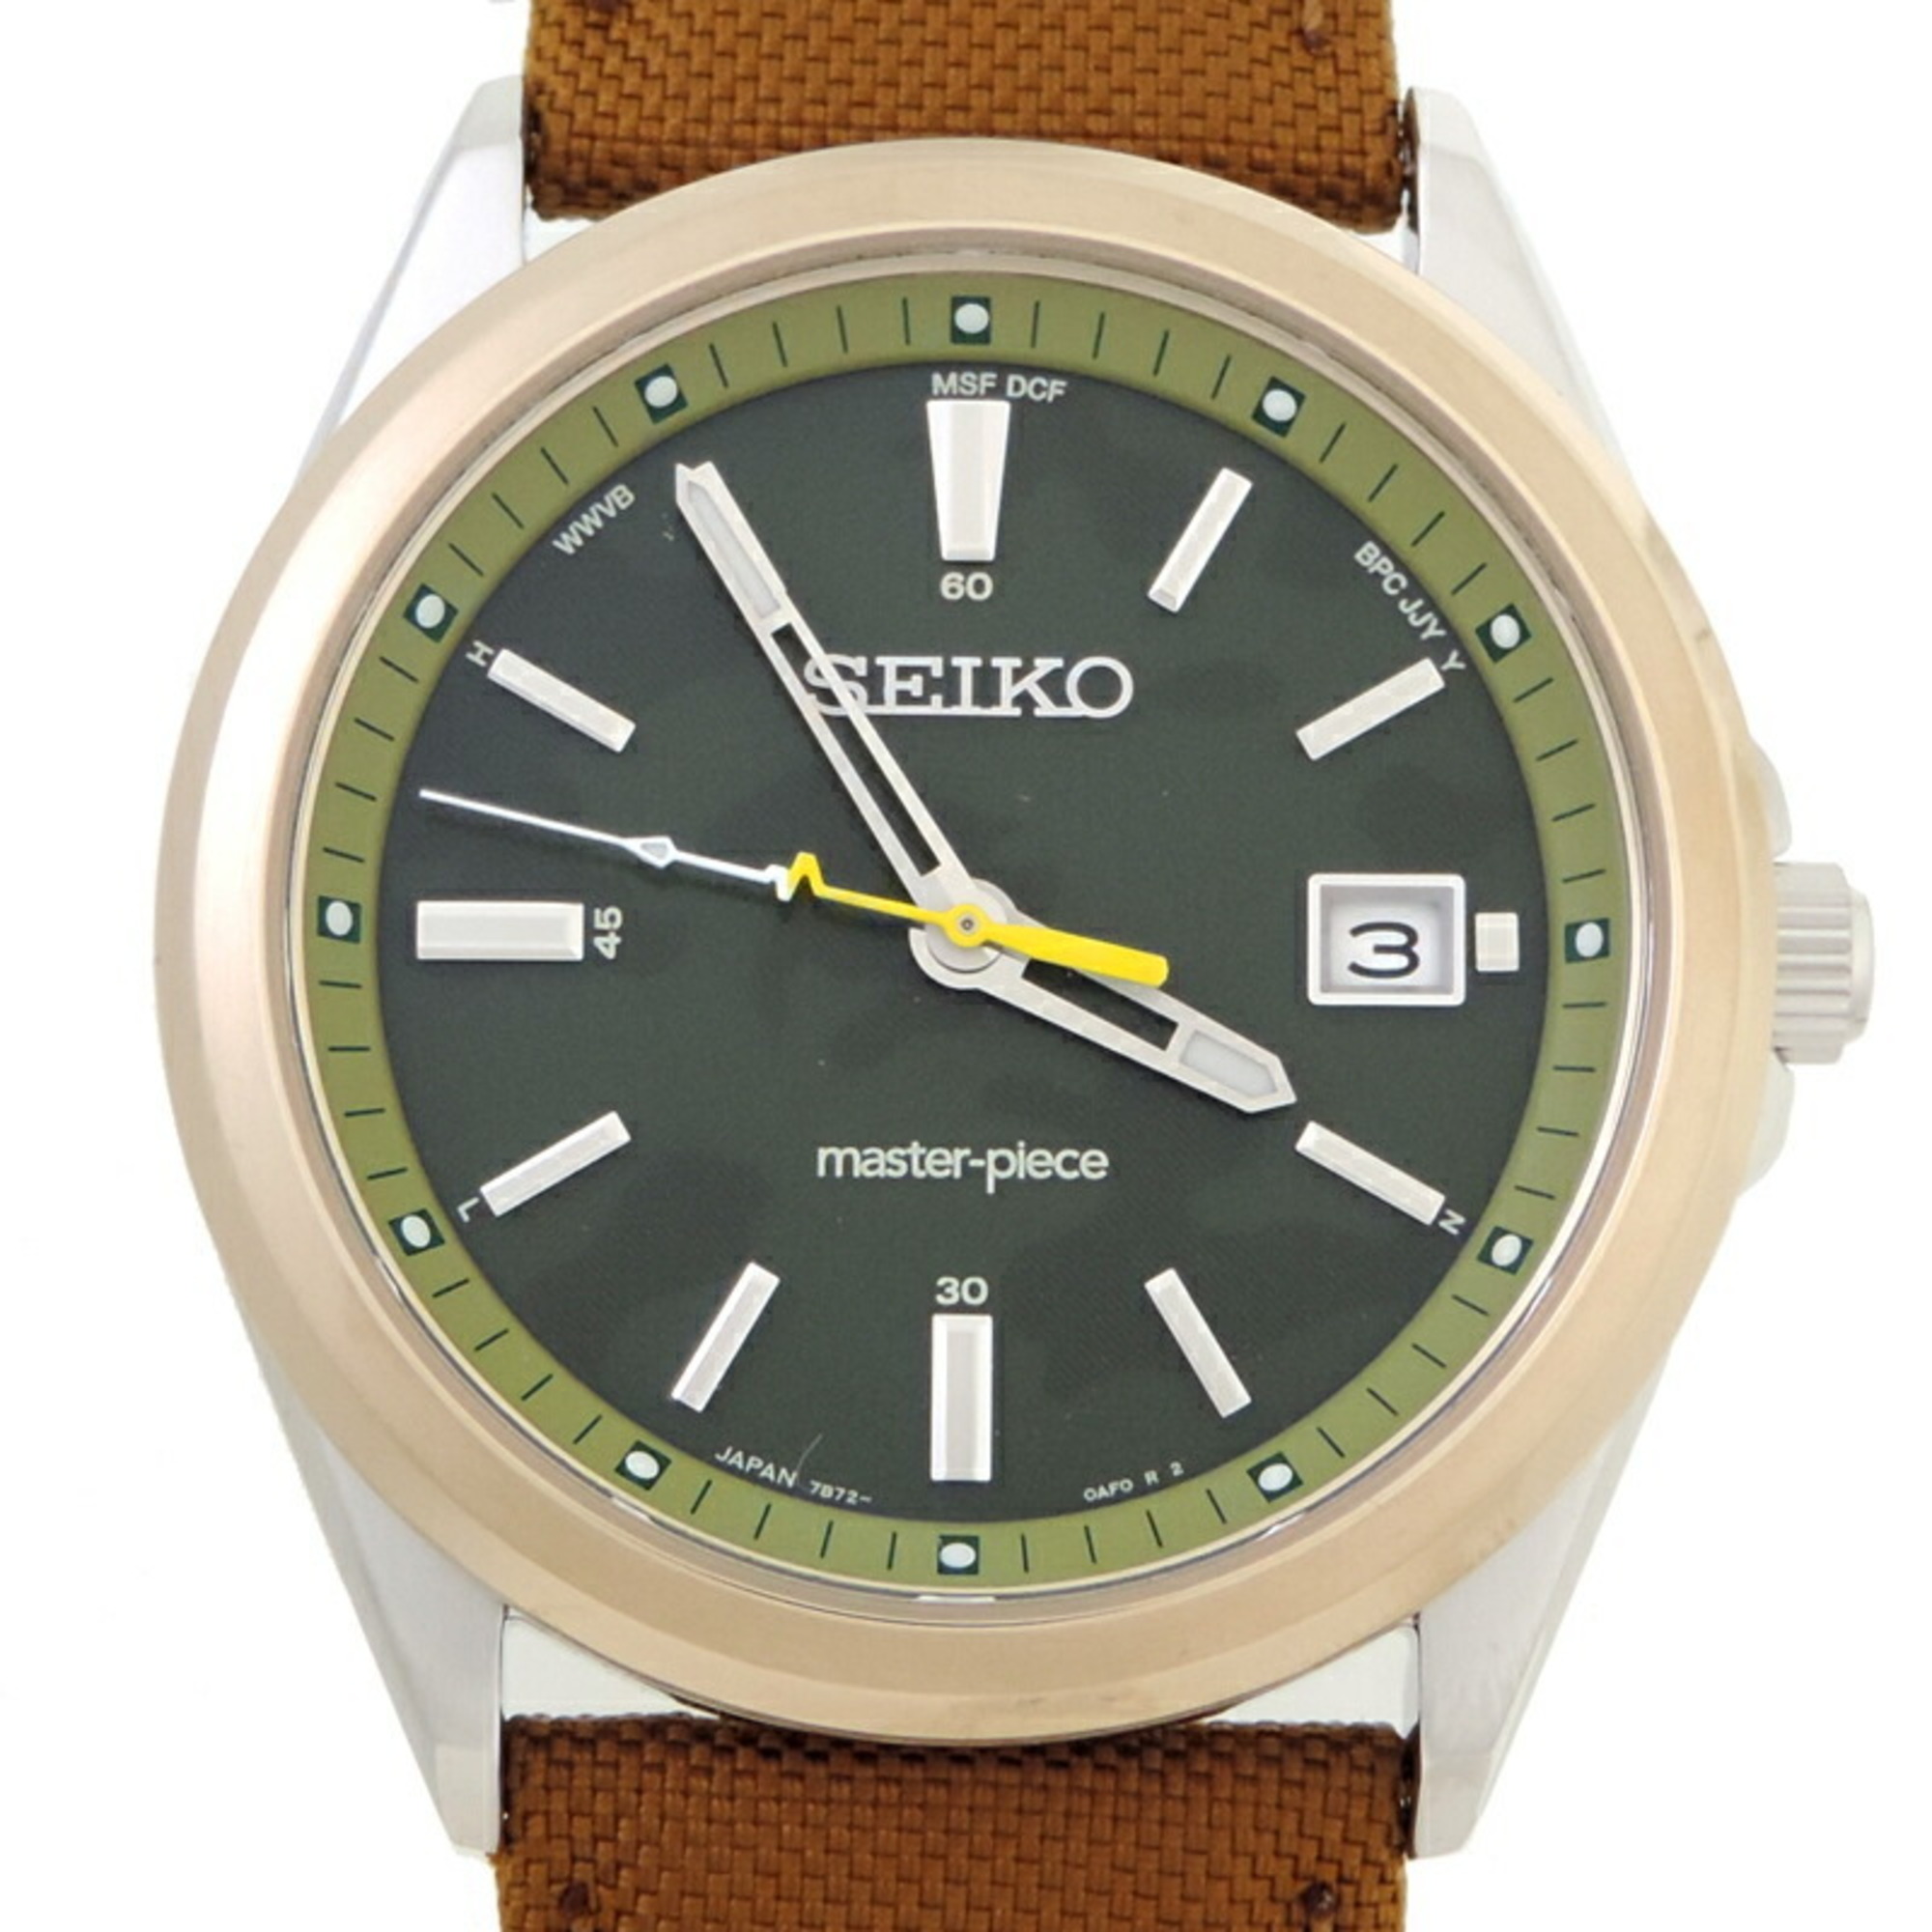 Seiko Selection Masterpiece Limited Edition to 700 Men's Watch SBTM314 (7B72-0AA0)